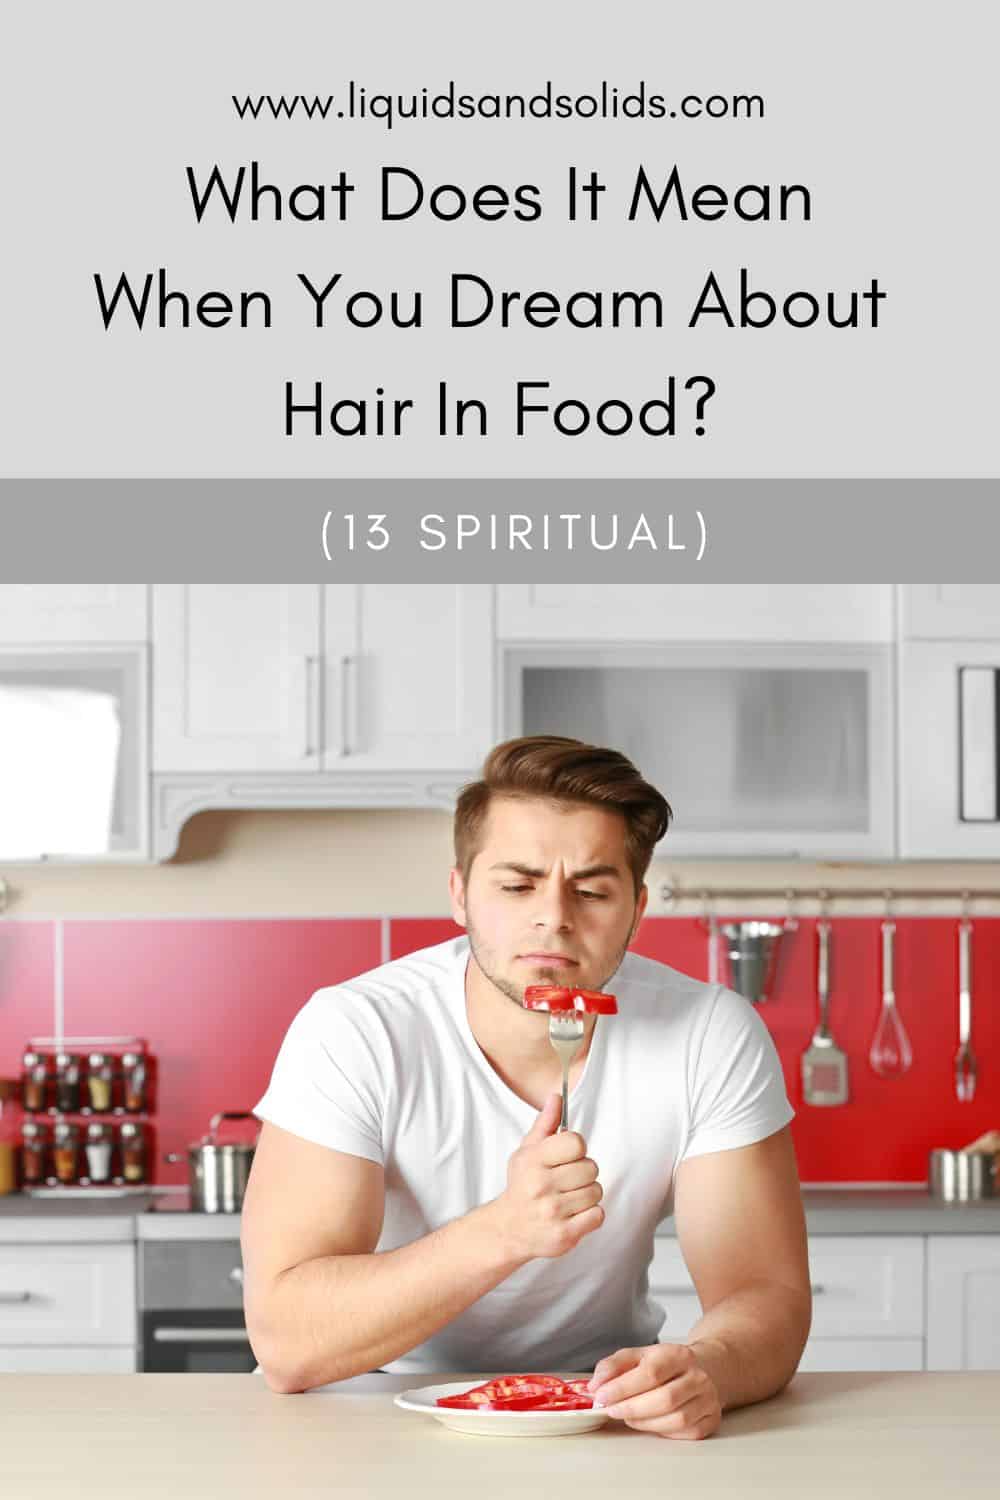 dream about hair in food meaning